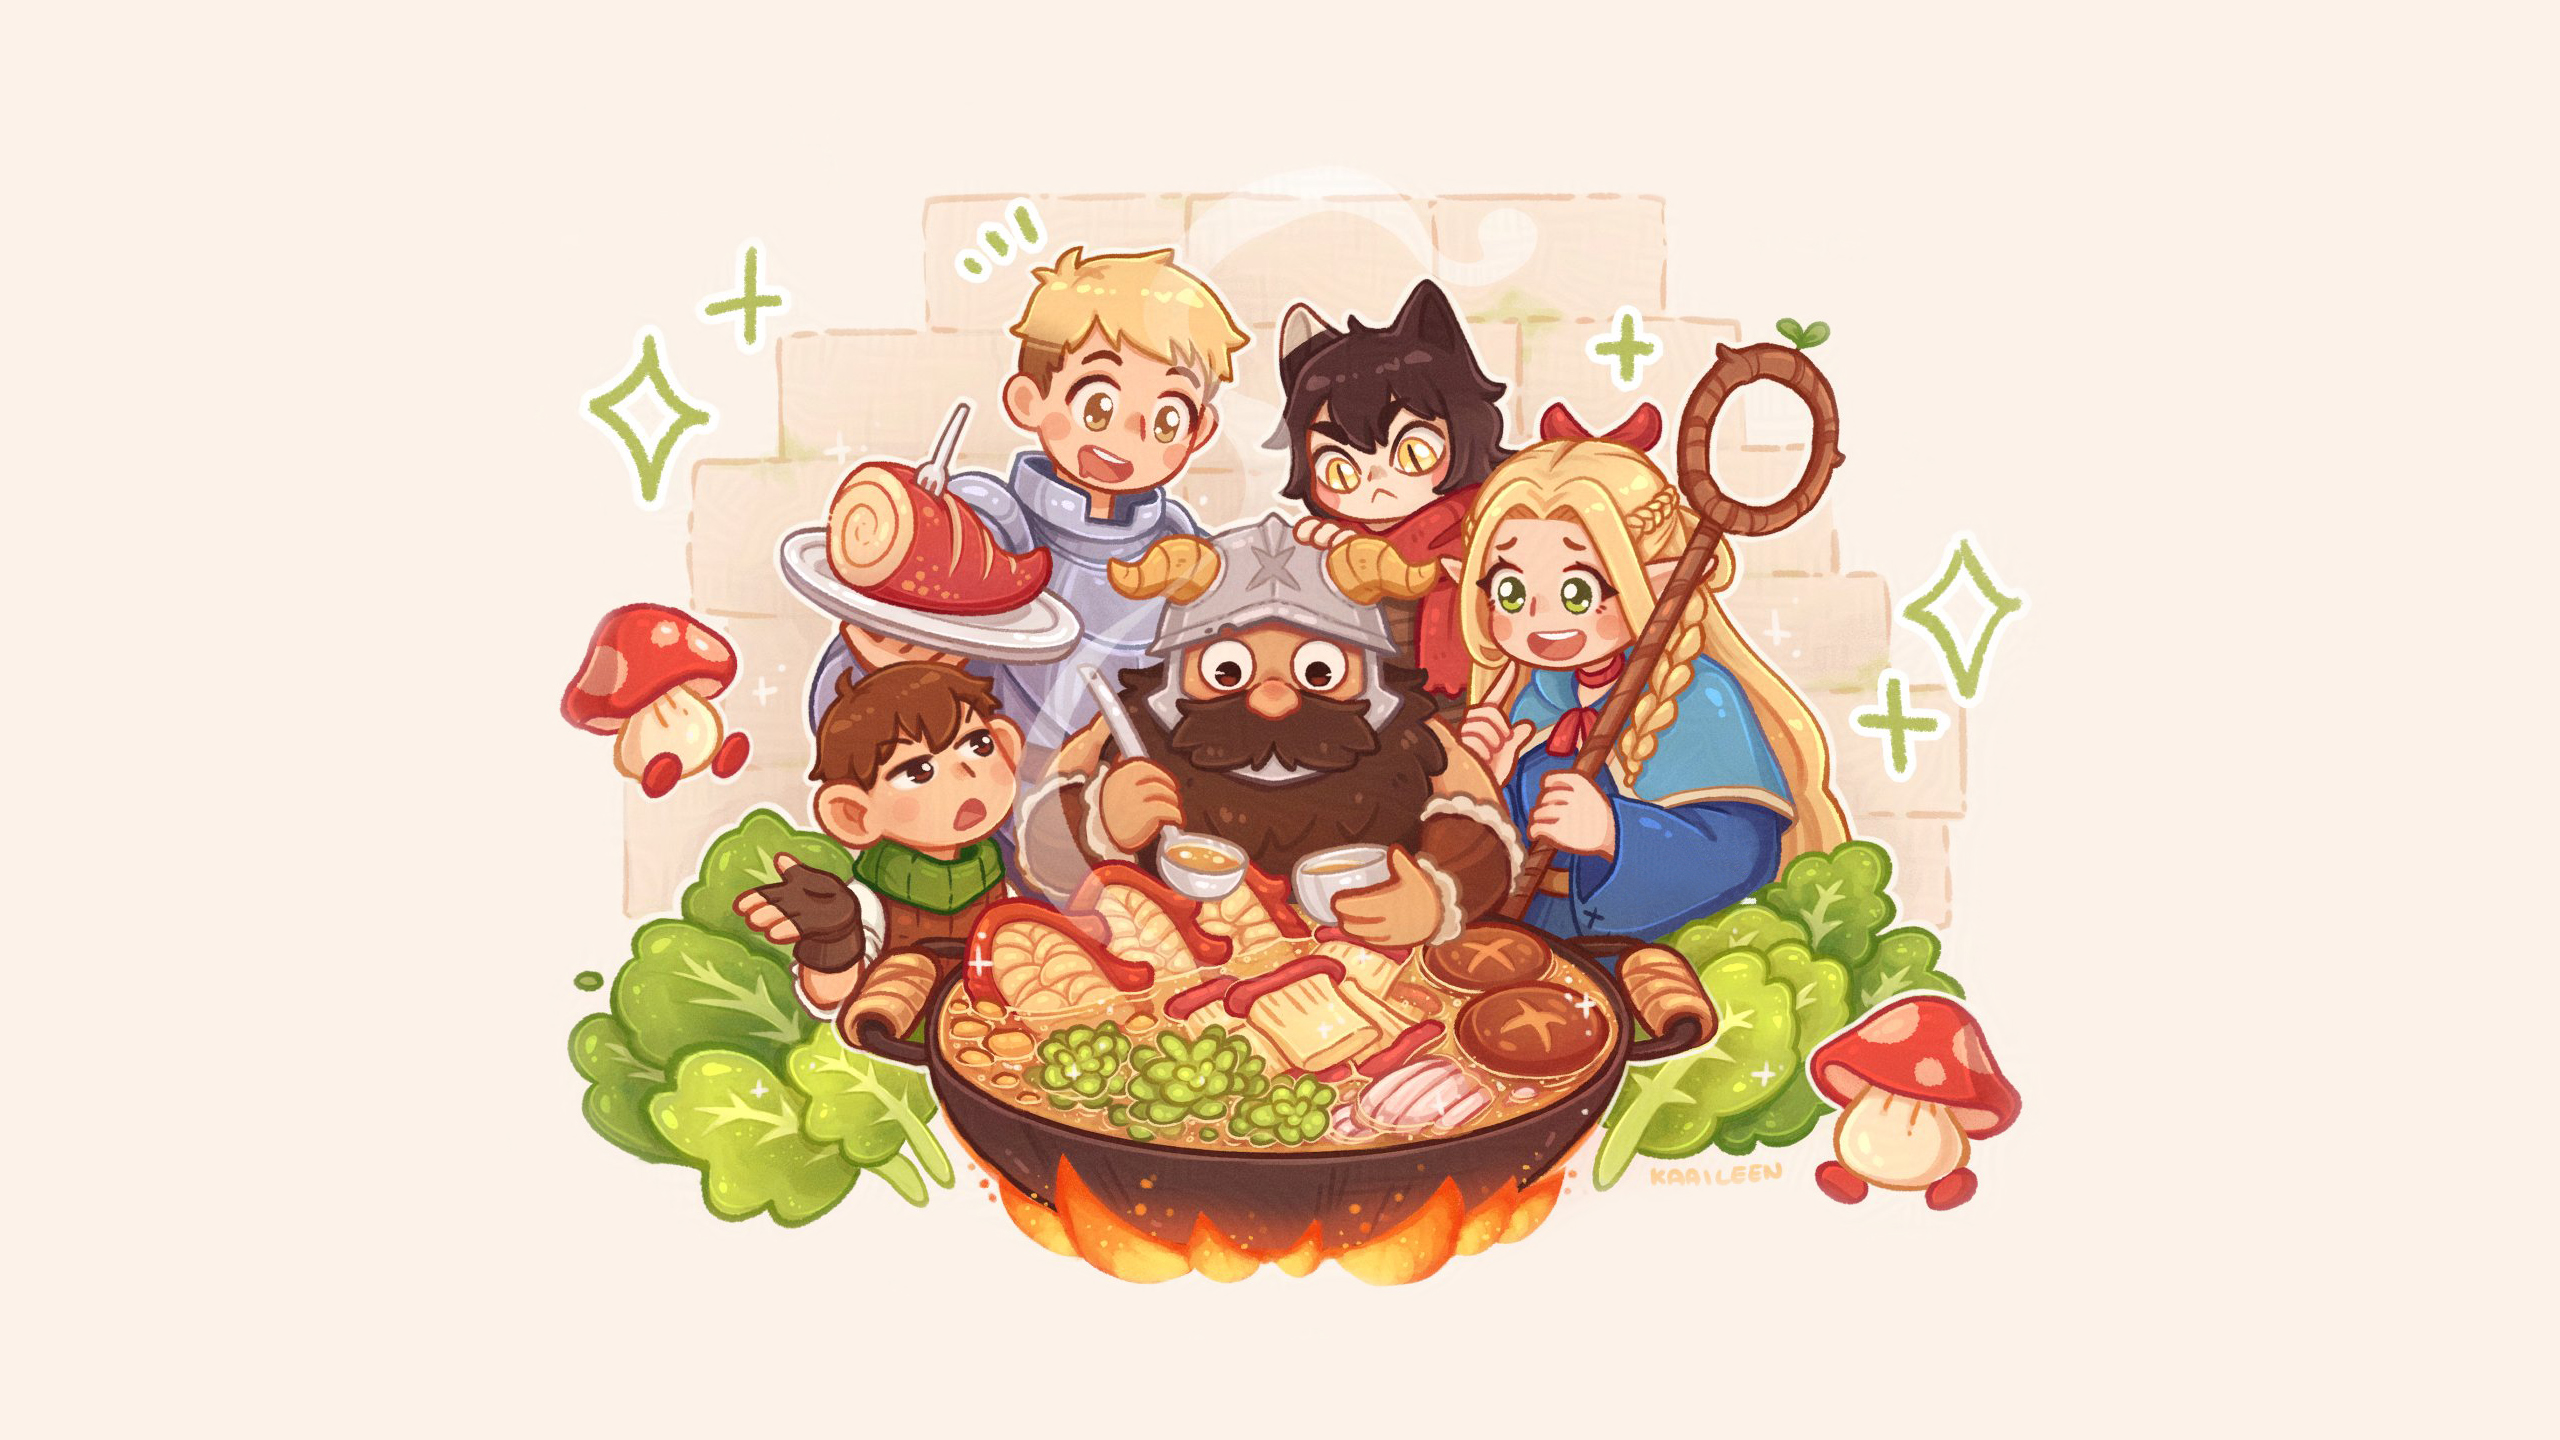 Anime 2560x1440 Delicious in Dungeon Chilchuck Tims Laios Thorden Marcille Donato Senshi (Delicious in Dungeon) Izutsumi (Delicious in Dungeon) beard dwarf Hobbits elves ribbon staff cat girl ninjas yellow eyes cat ears bangs braids robes scarf horns helmet blonde short hair long hair mushroom brunette food cooking pans (tool) lettuce bread meat peas drool soup vegetables spoon gloves fingerless gloves green eyes cat eyes brown eyes moustache armor anime anime boys anime girls fork choker pointy ears plates